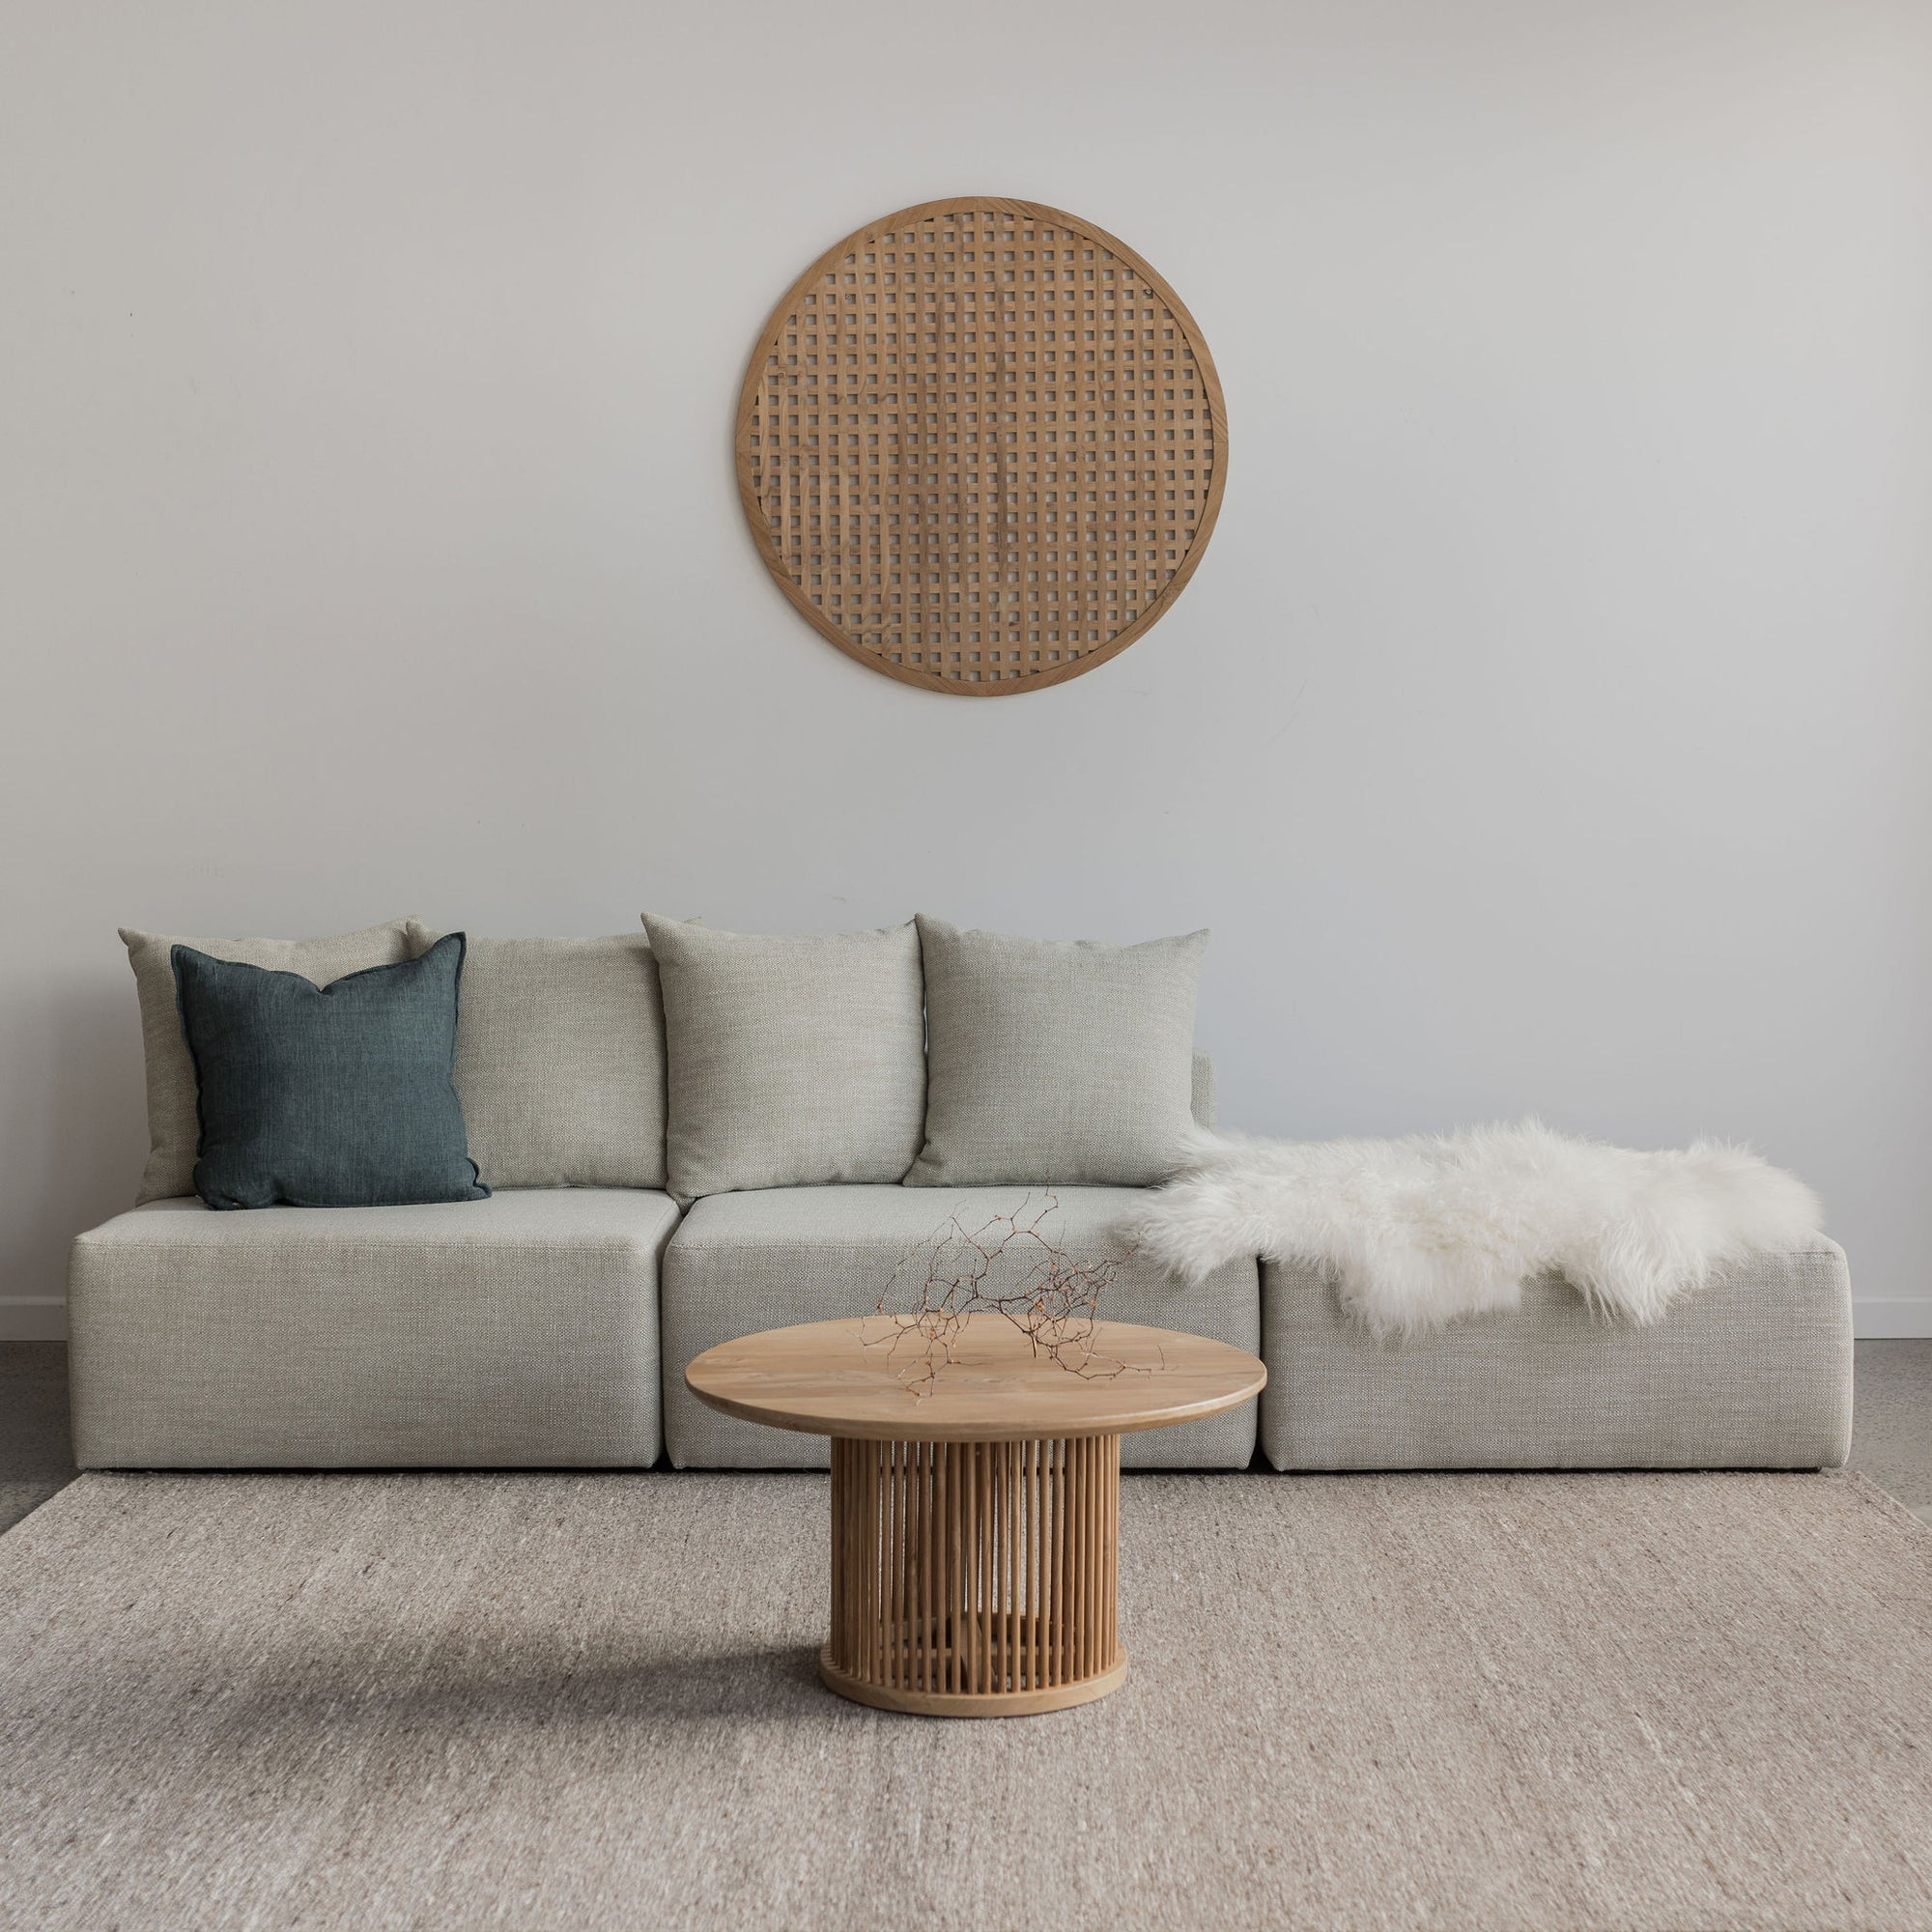 wooden wall art from Corcovado furniture store online nz modular sofa and ottoman chaise with white icelandic sheepskin and wooden round coffee table